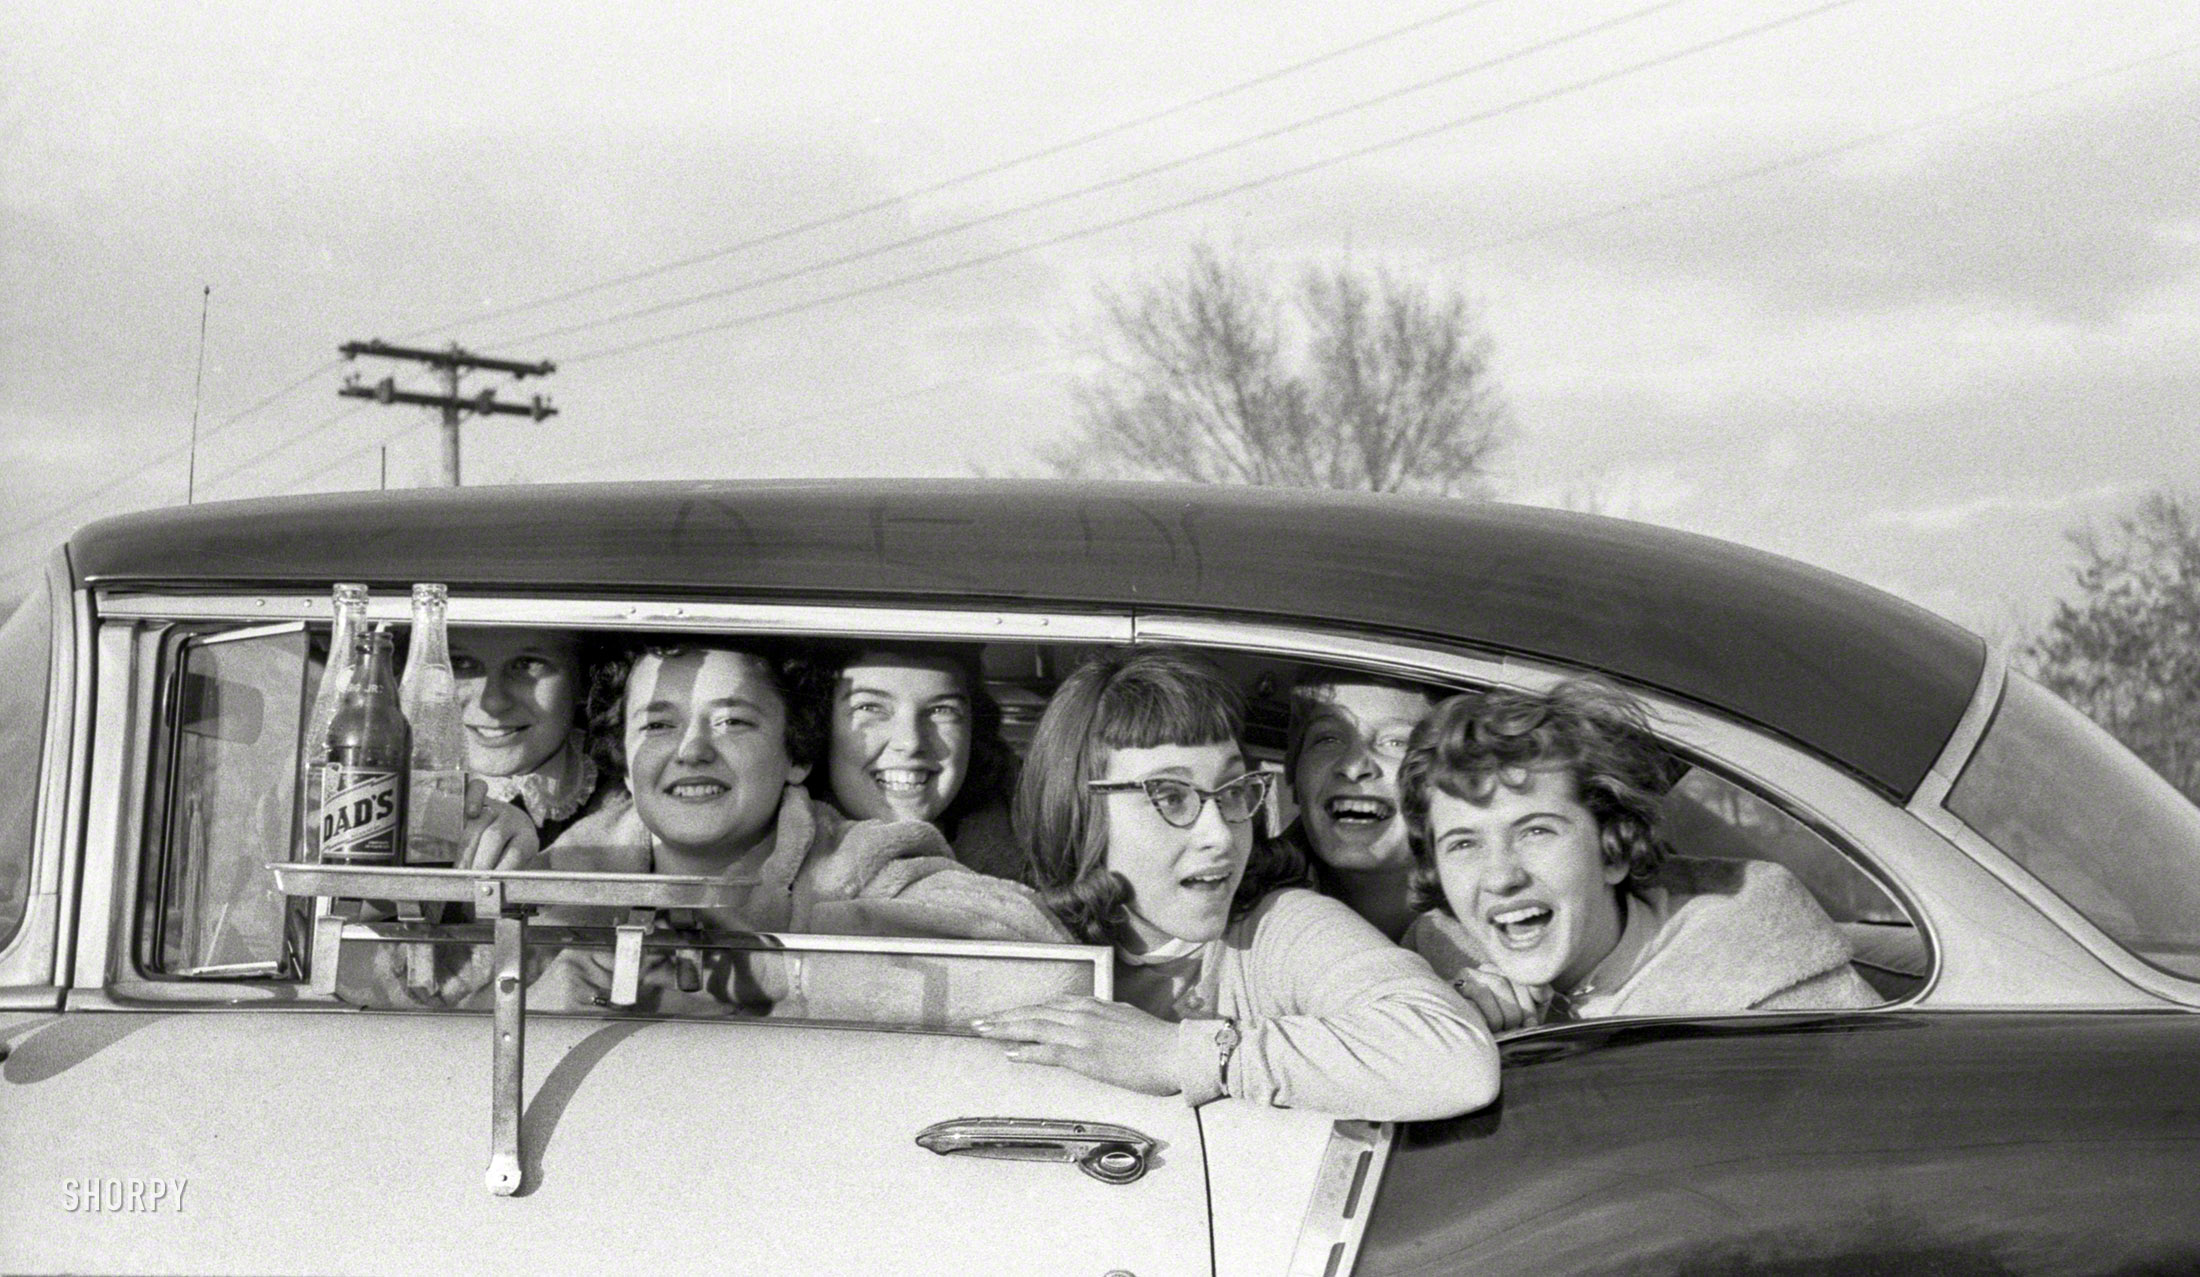 March 1957. Gary, Indiana. "Teenage girls in car at drive-in." From photos for the Look magazine assignment "How American Teenagers Live." View full size.